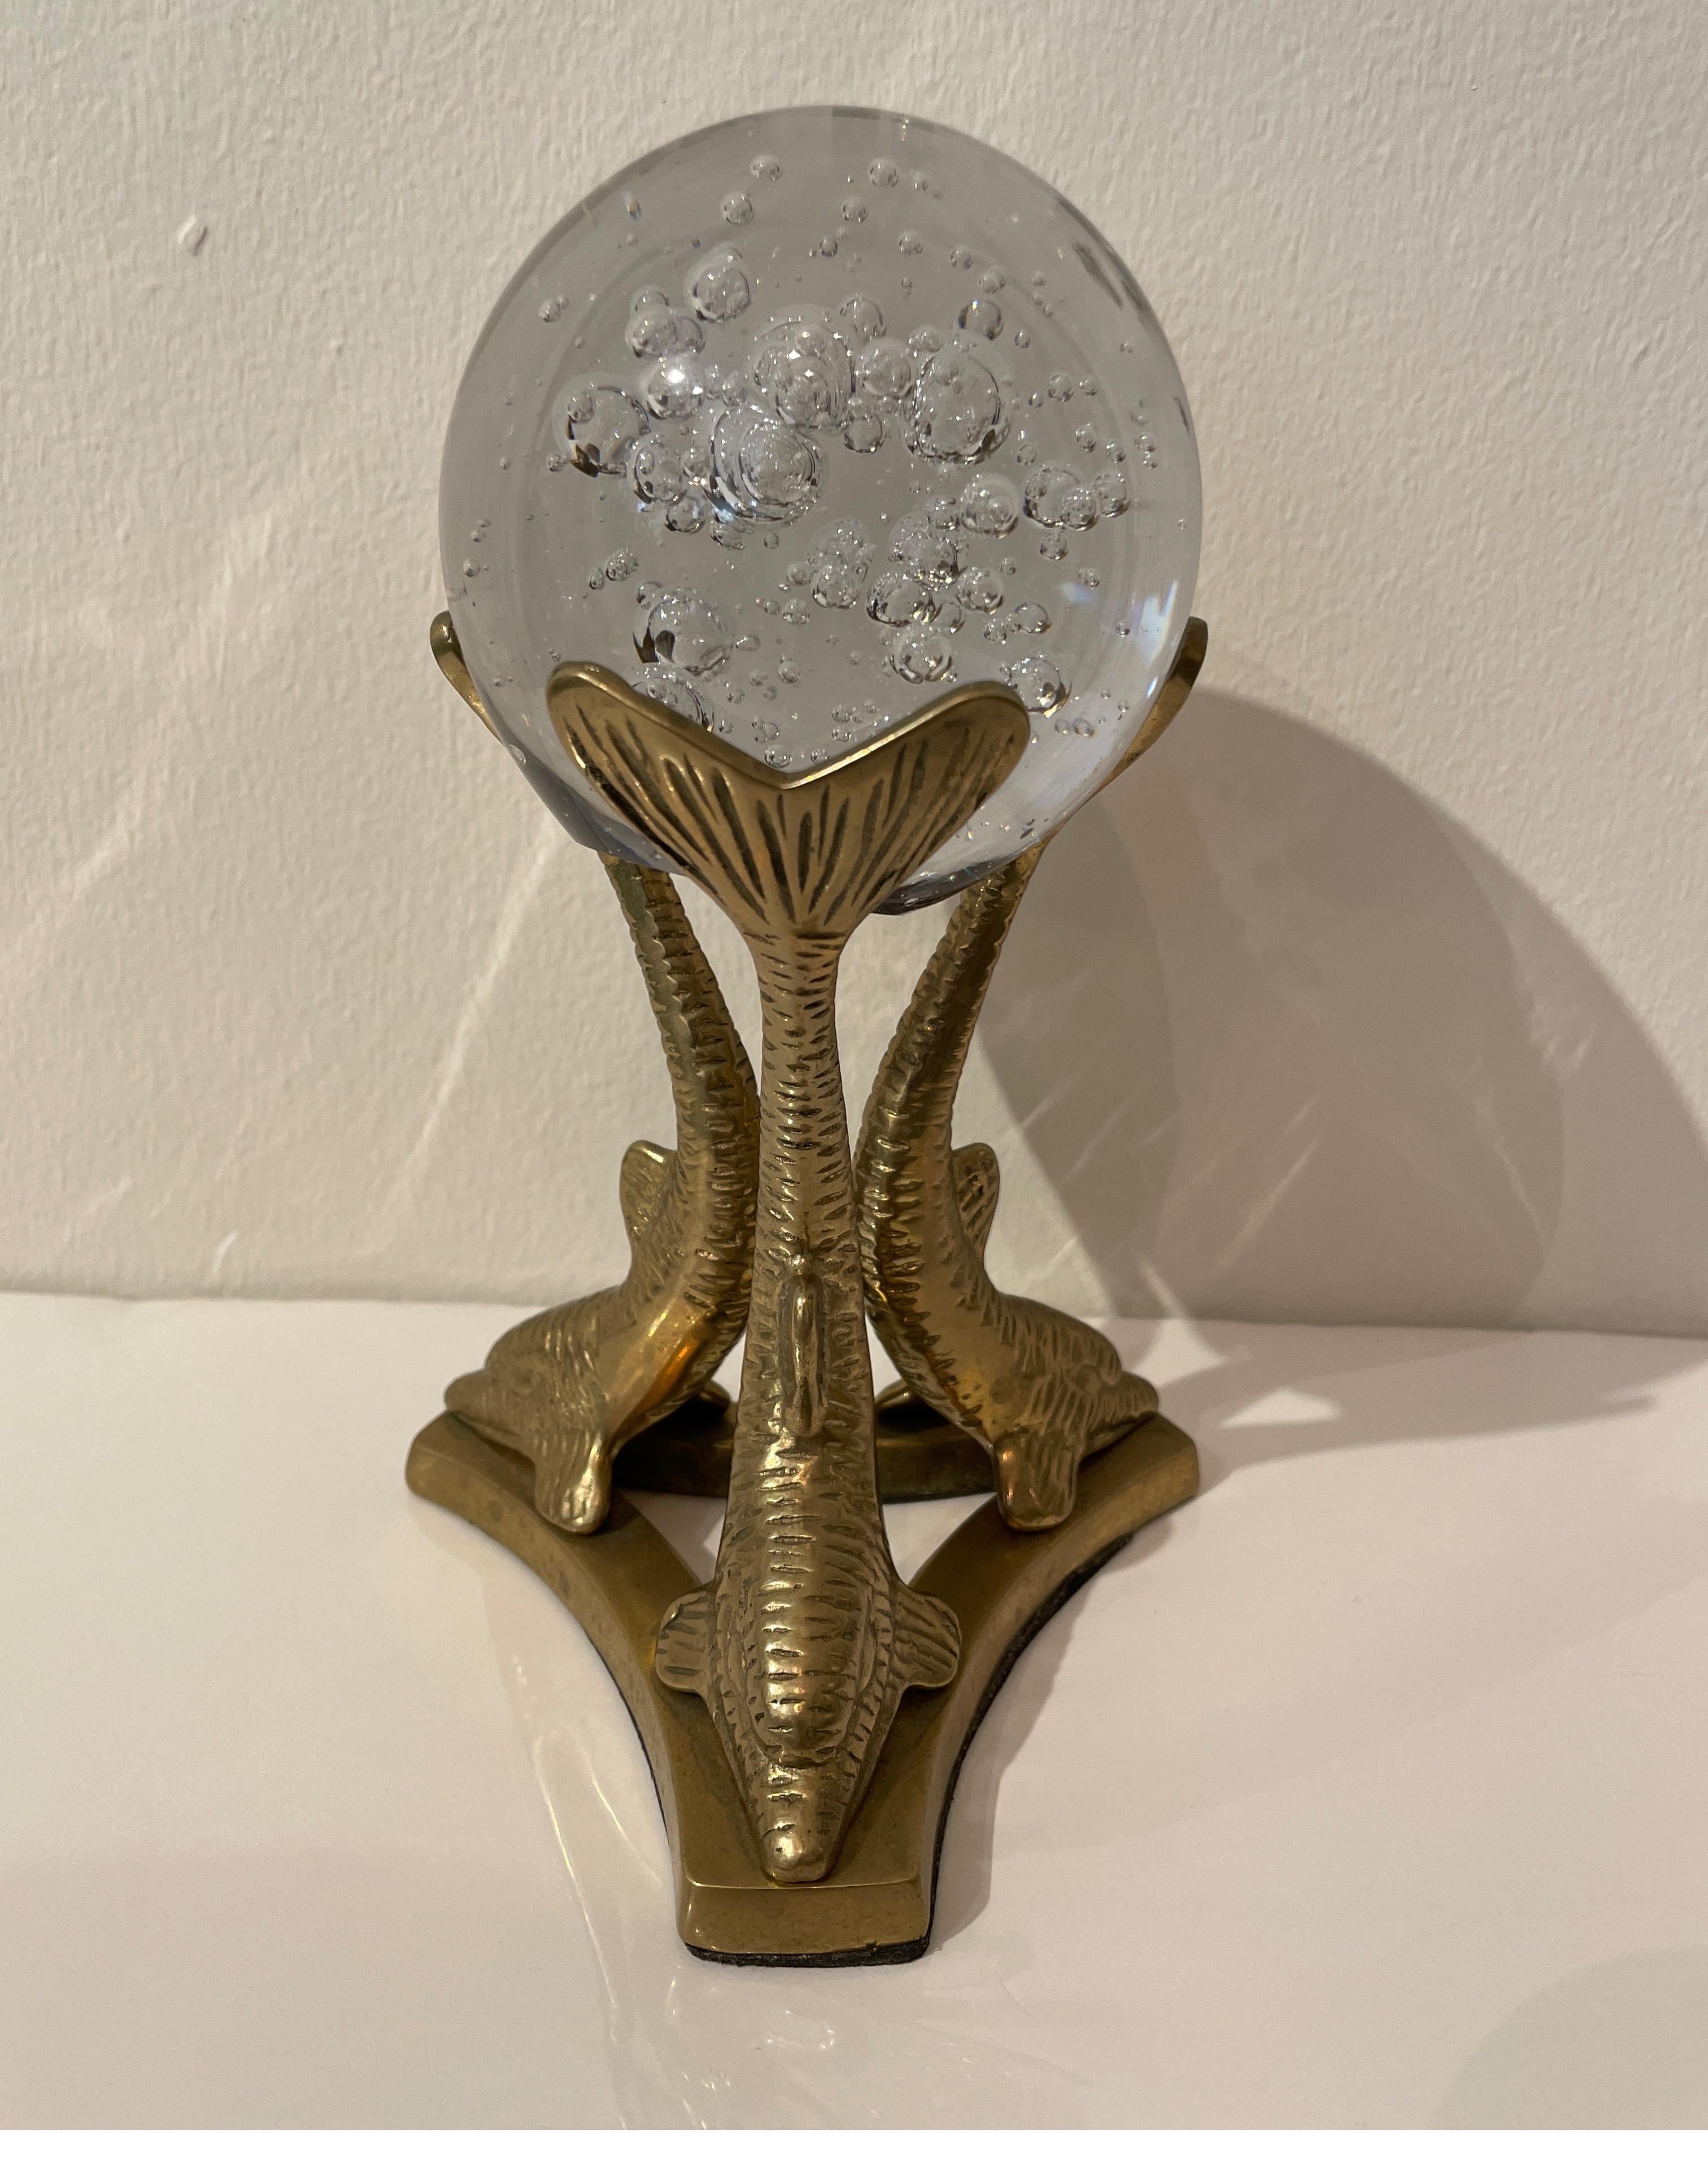 Crystal sphere with controlled bubbles supported by three brass dolphins.